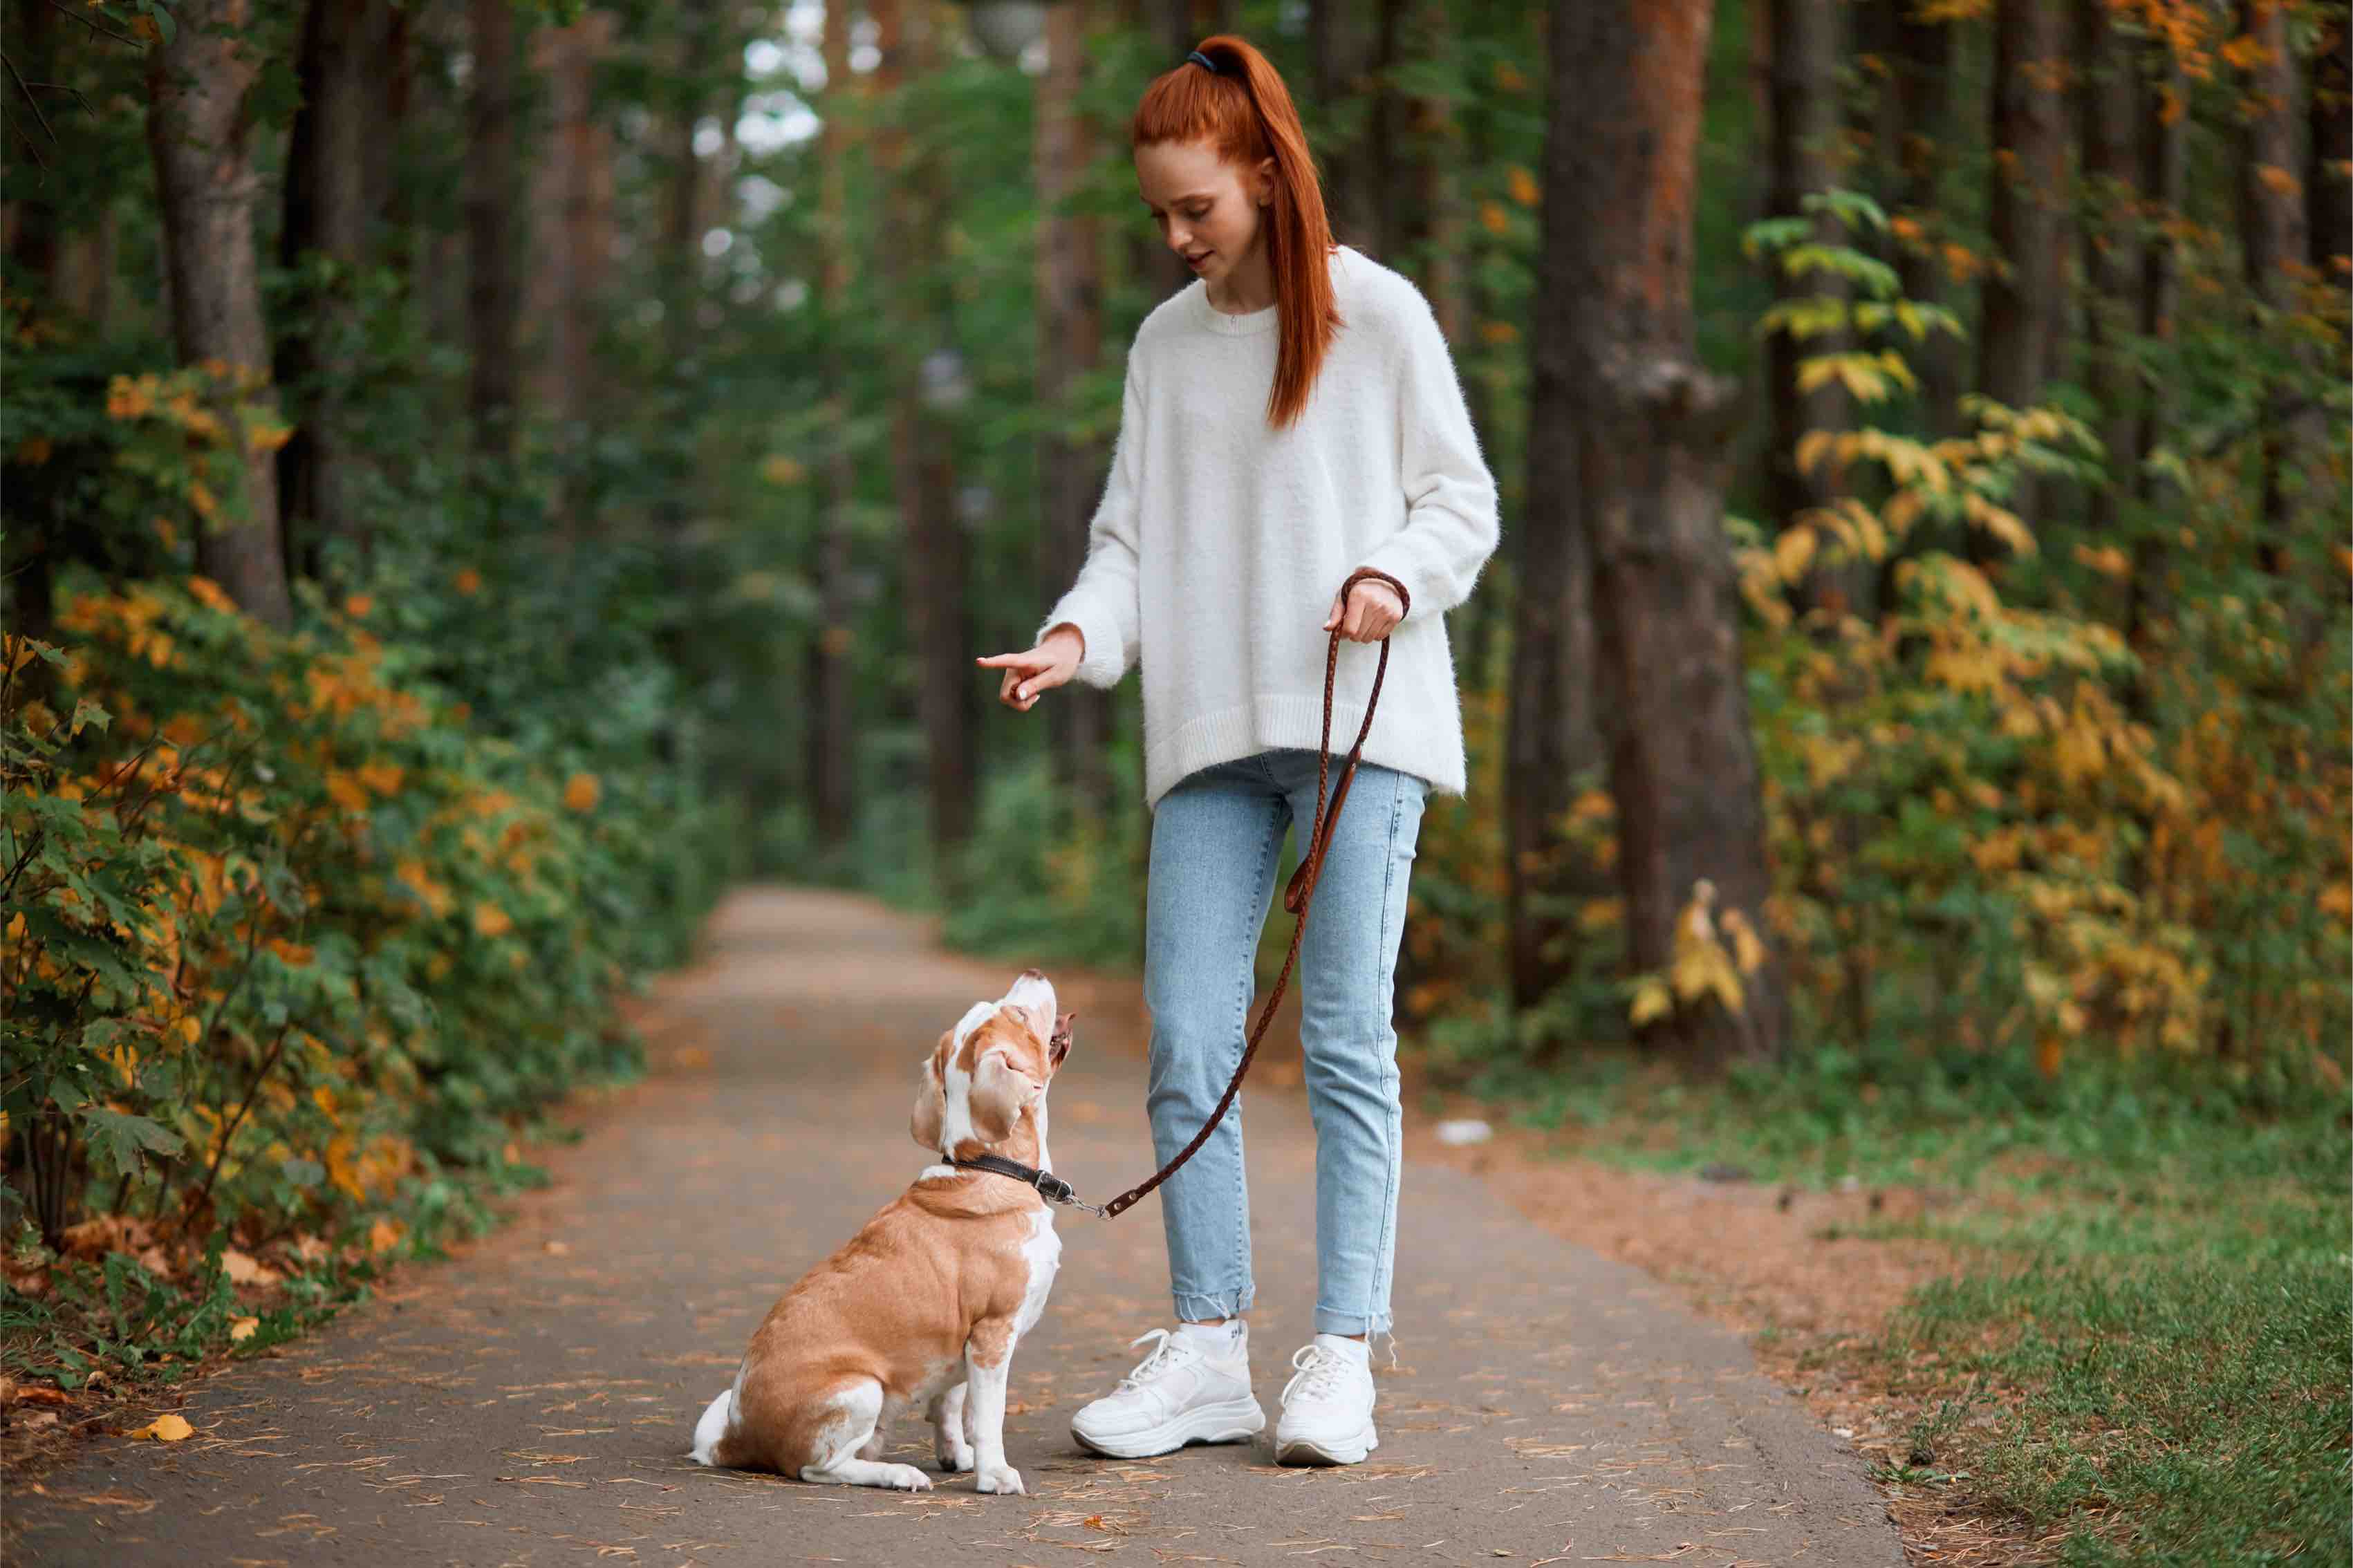 Girl and dog working on their Dog Training Elite Greater Cincinnati training on a walk in the park.